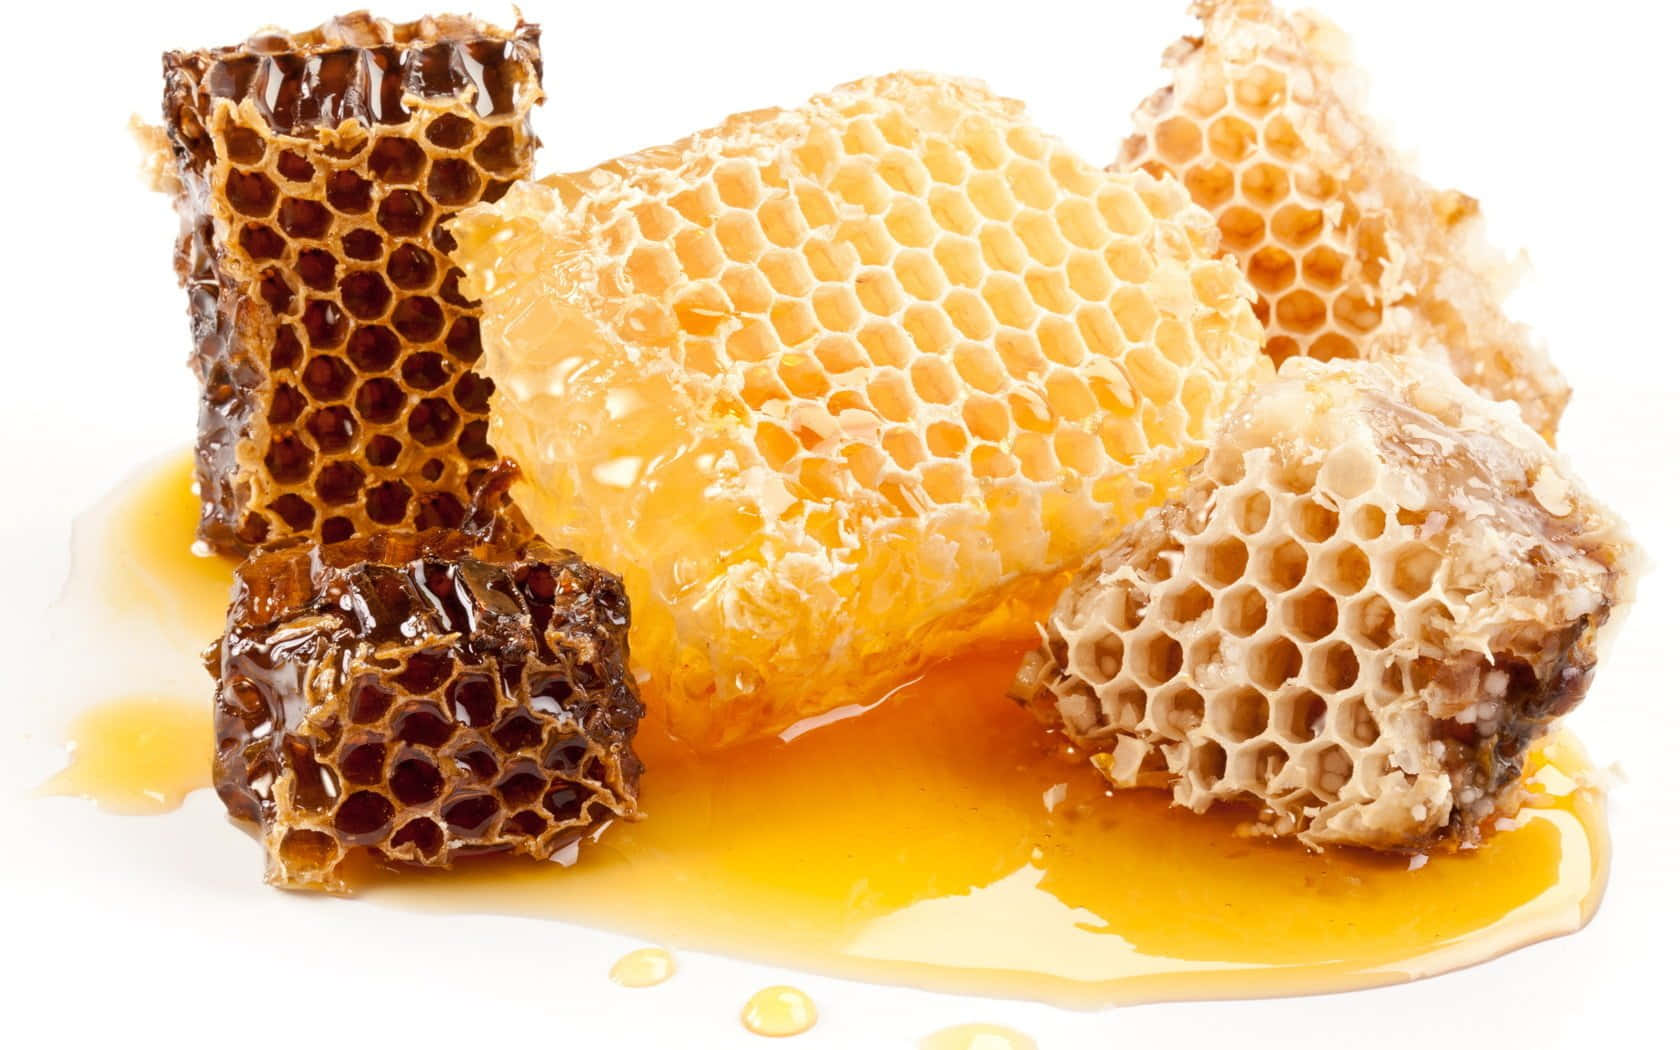 Sweet honeycomb dripping with honey.